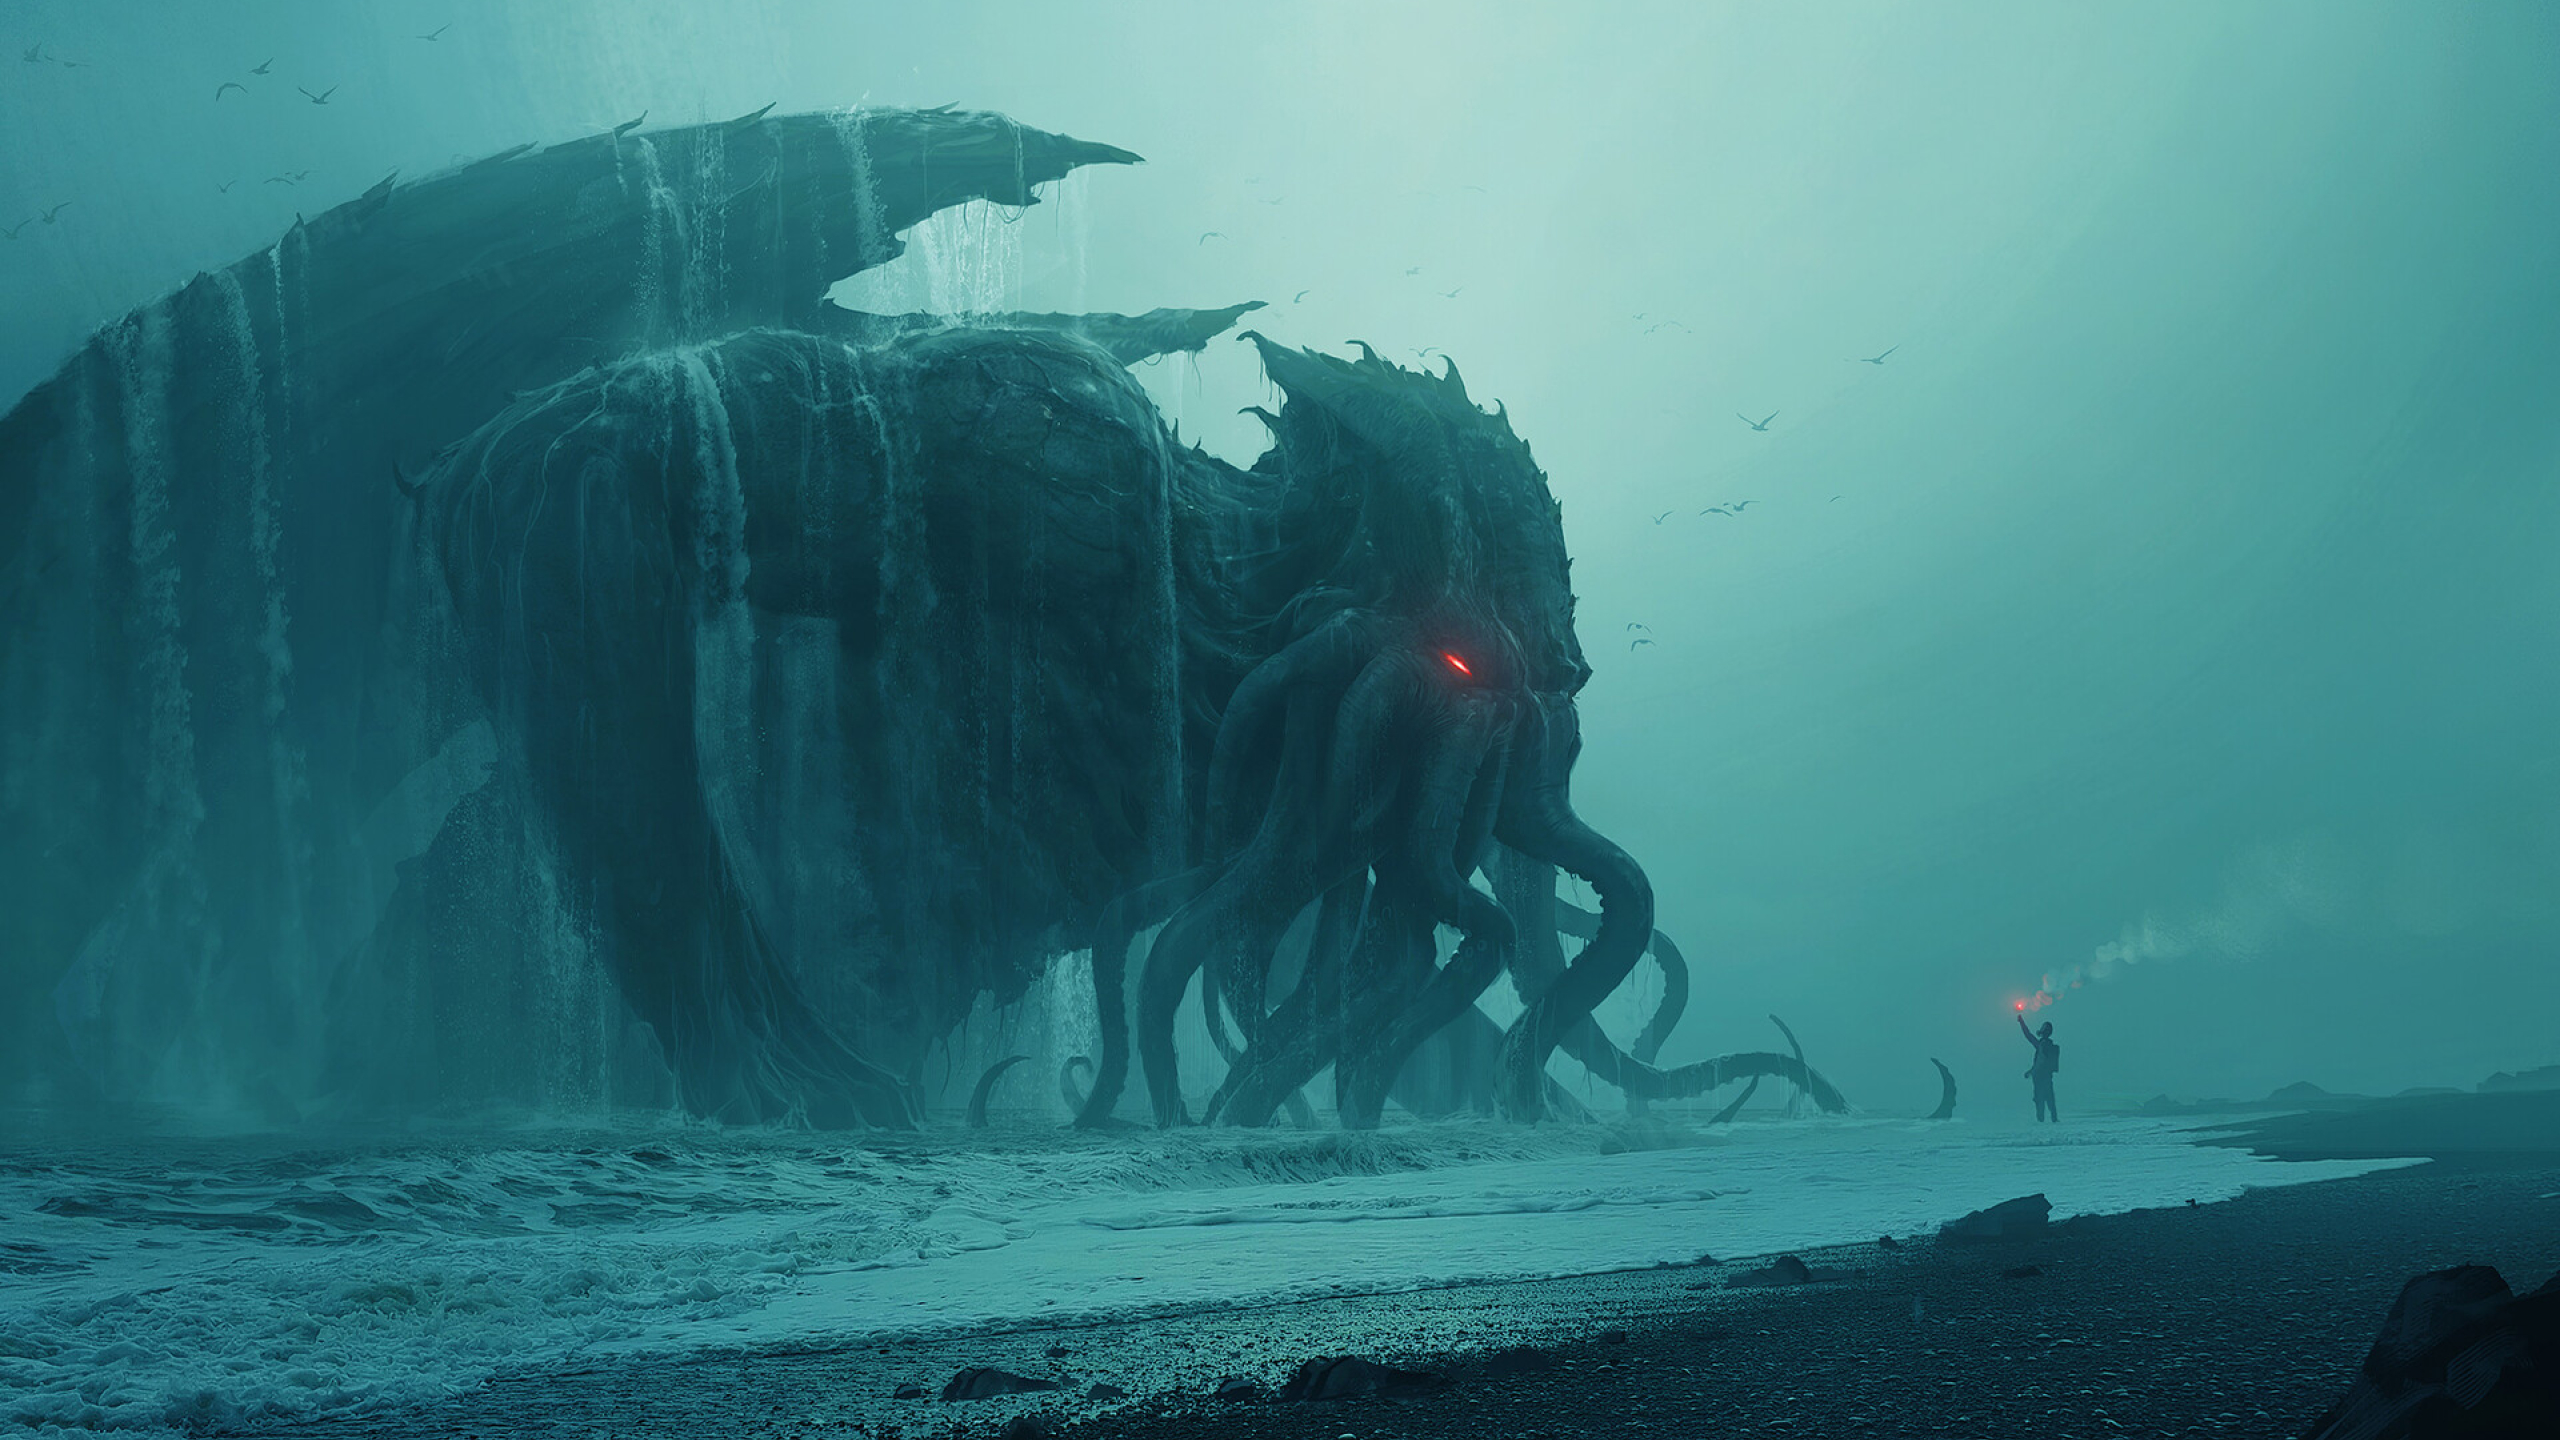 2560x1440 Fantasy Cthulhu Sea Monster 1440p Resolution Wallpaper Hd Fantasy 4k Wallpapers Images Photos And Background Wallpapers Den